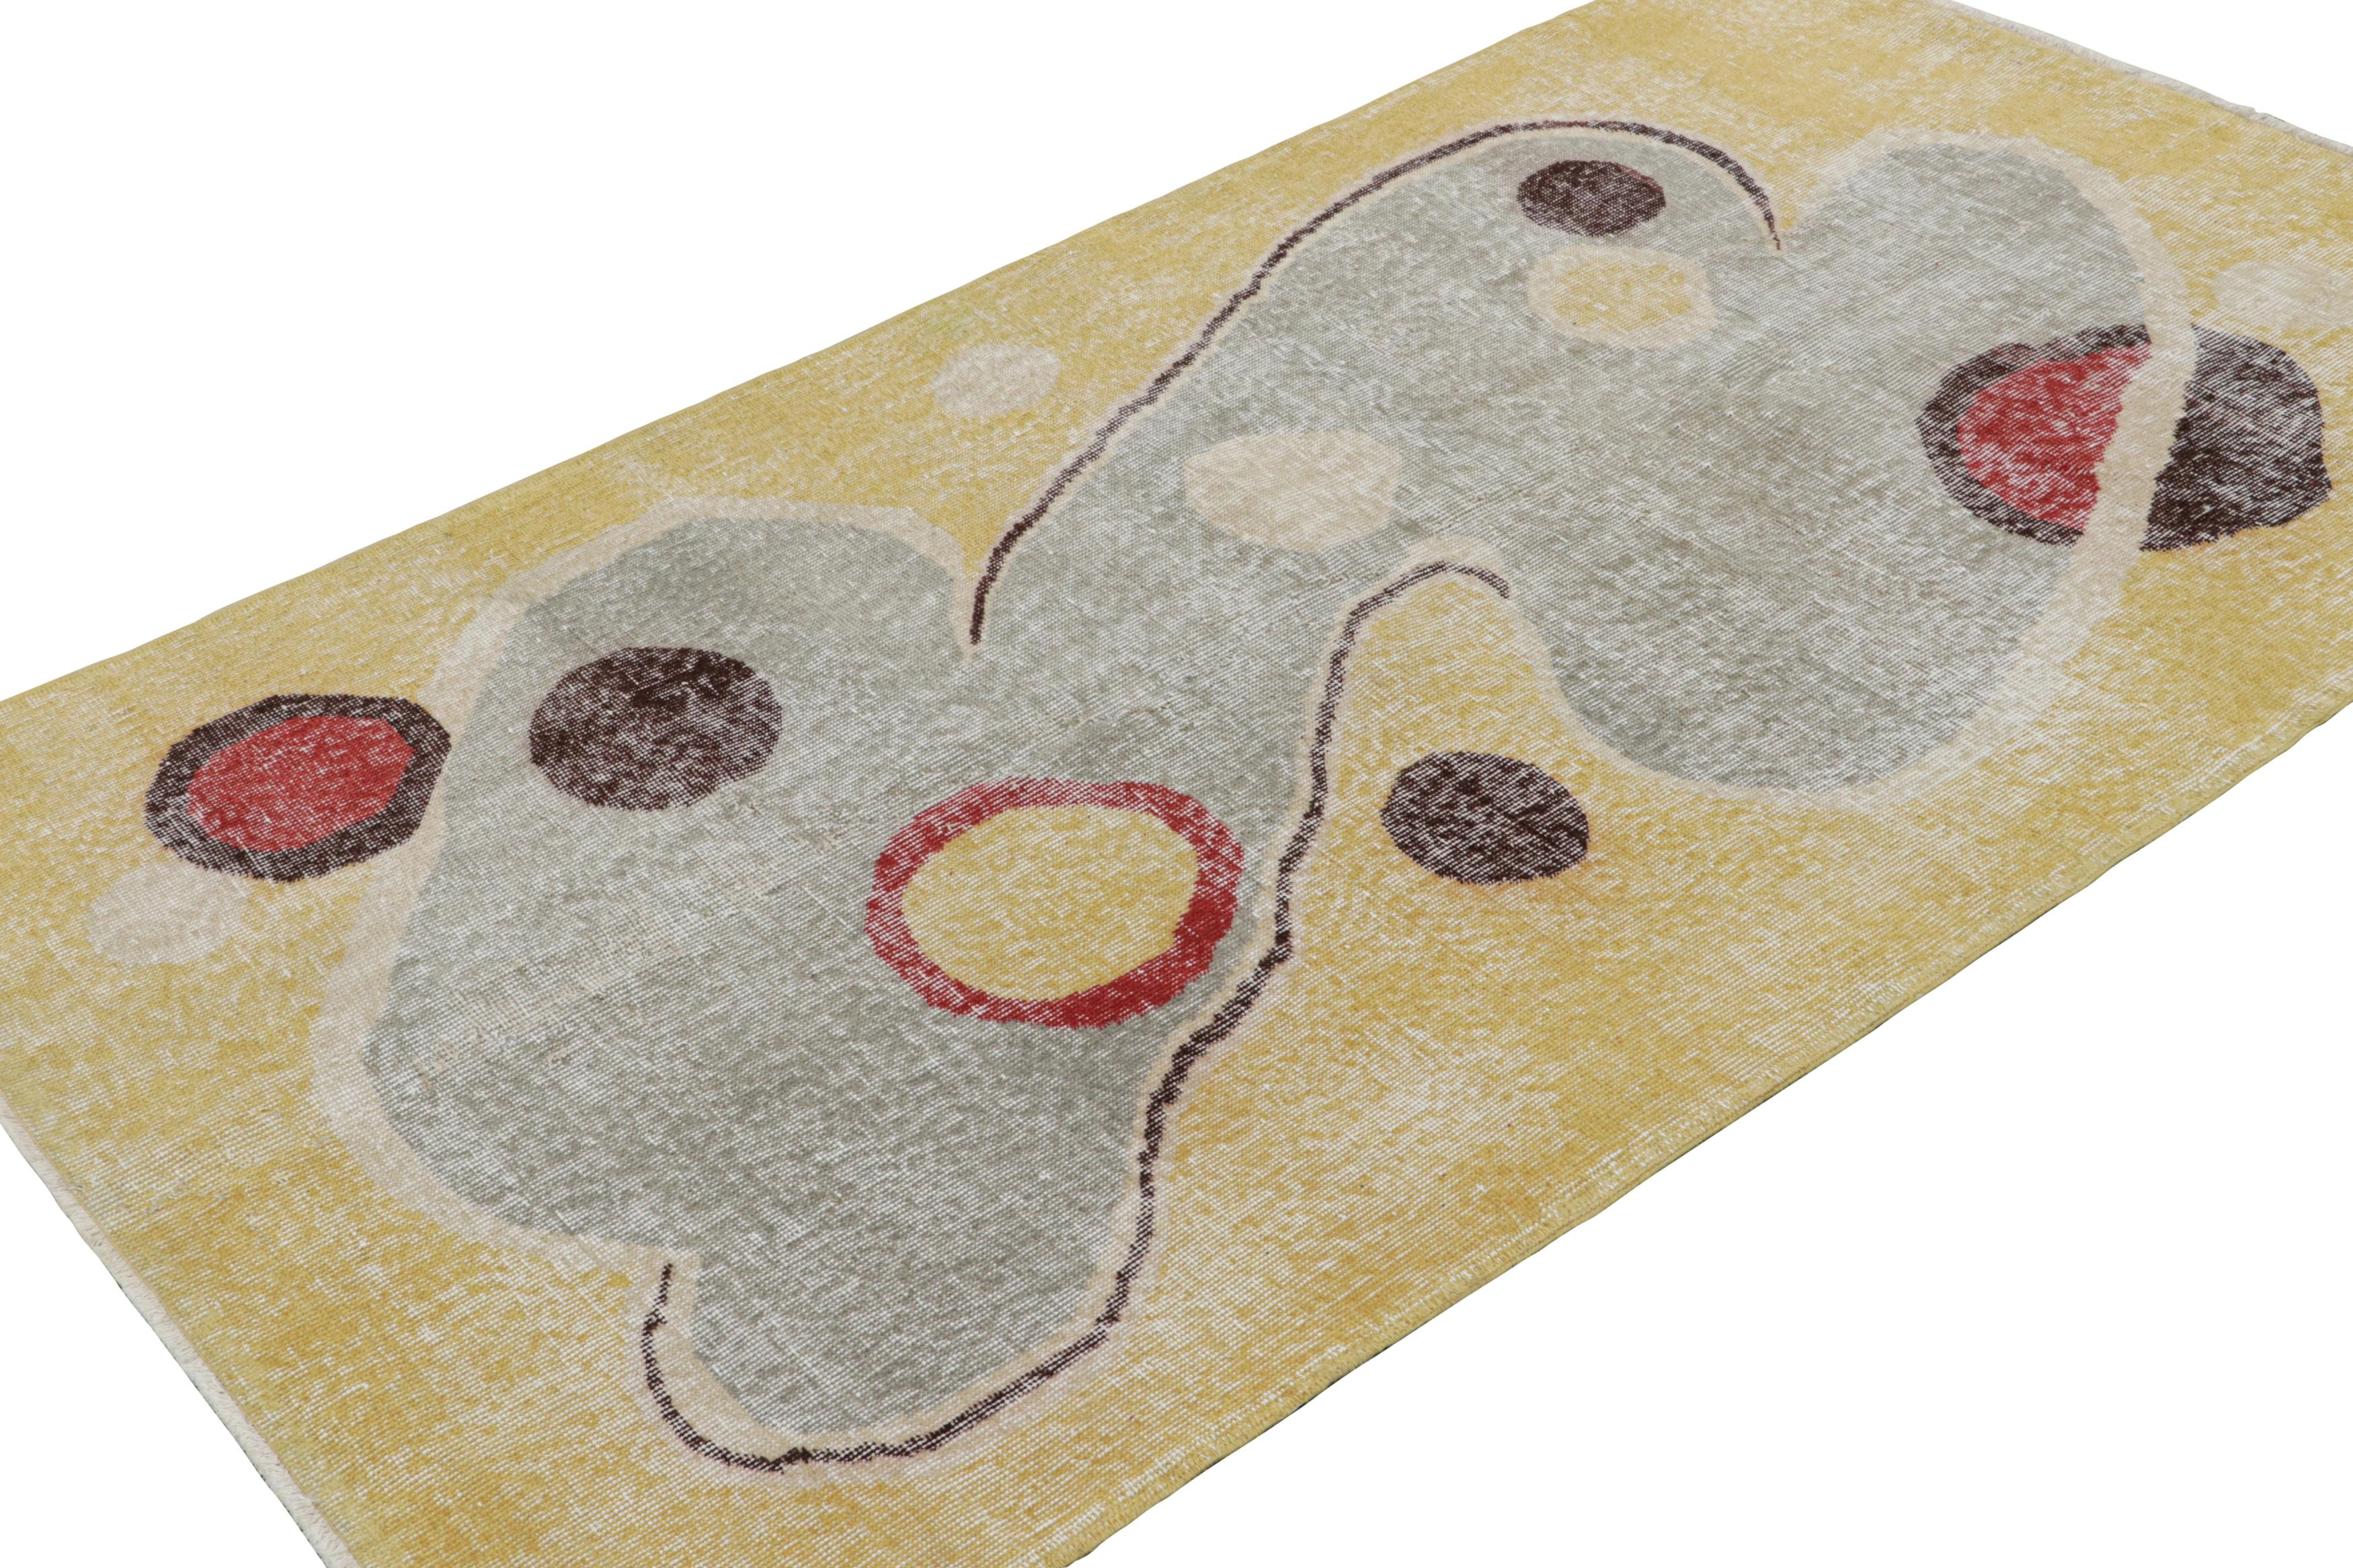 This 4x7 Vintage Art Deco rug is believed to be a rare work from mid-century artist Zeki Müren. Hand-knotted in wool circa 1960-1970, this rug employs a range of playful colors and modern, abstract patterns. 

On the Design: 

Its pops of color